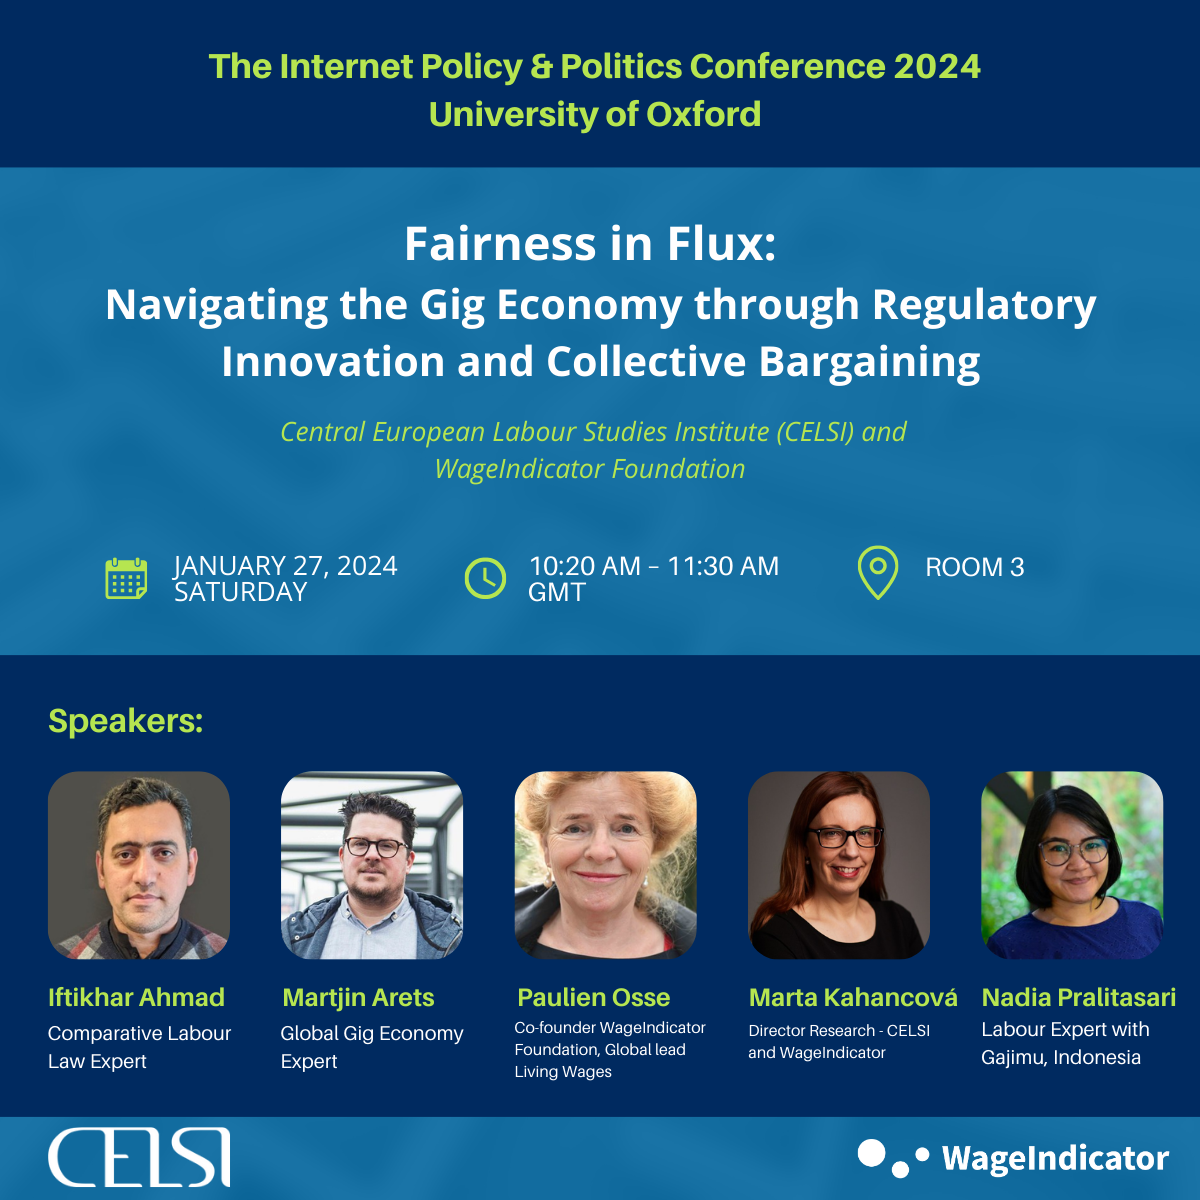 Join us for a session on the regulatory and collective bargaining issues in the gig economy, this Saturday at 10:20-11:30 GMT!